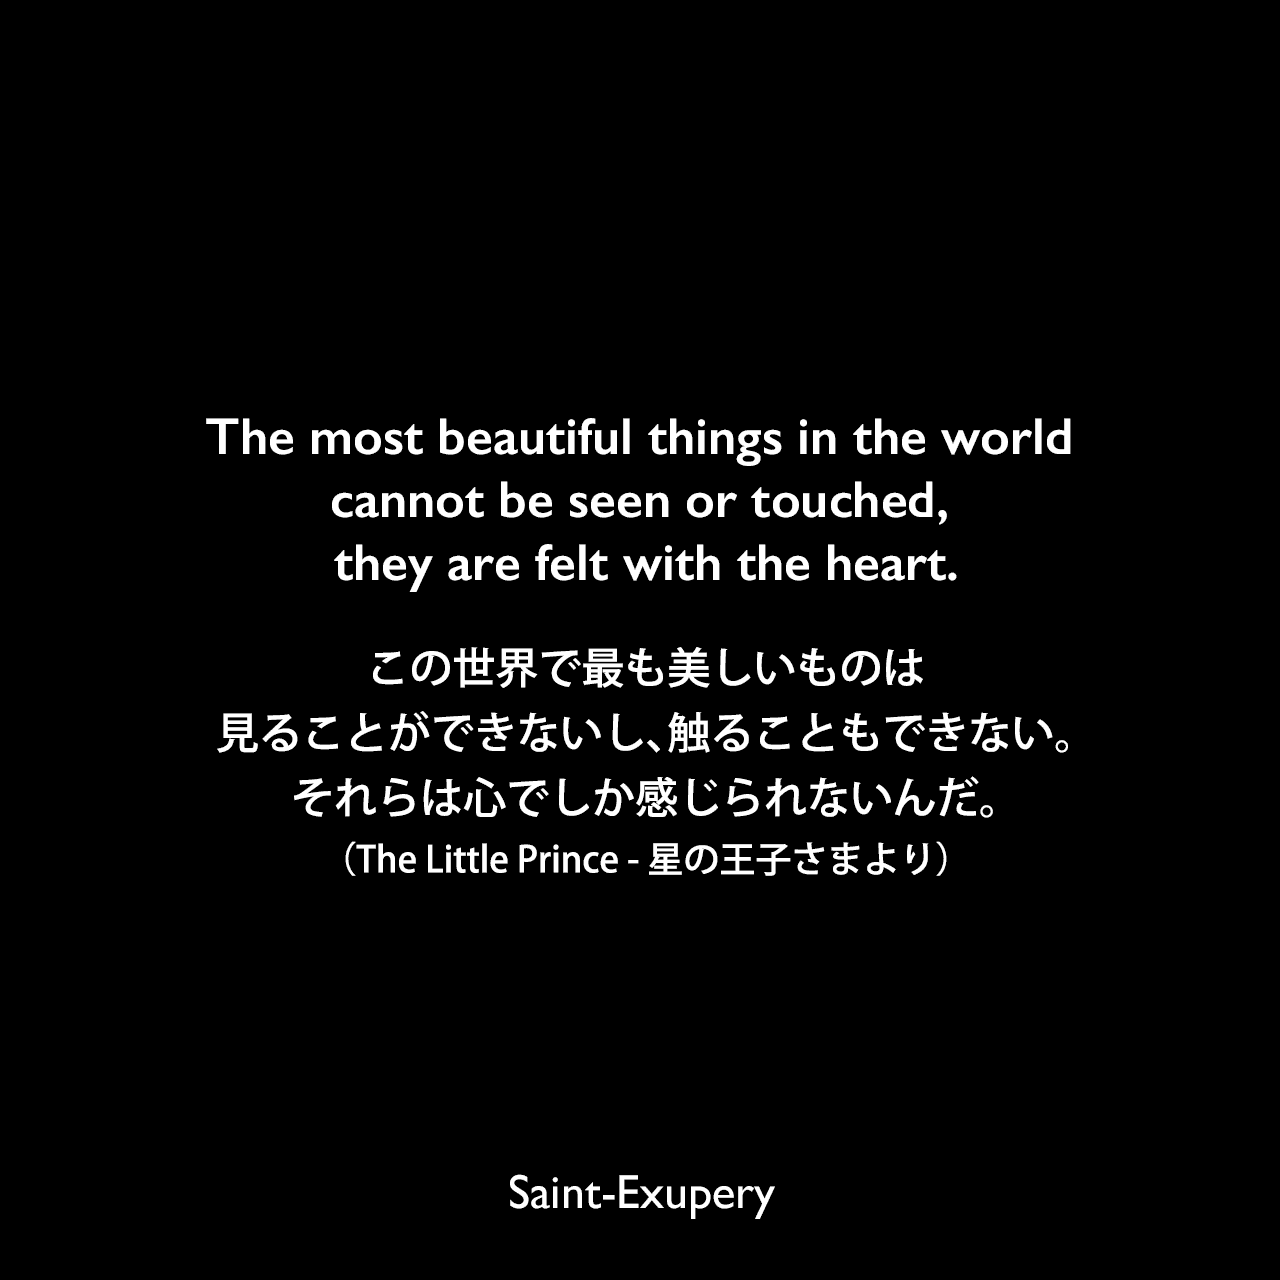 The most beautiful things in the world cannot be seen or touched, they are felt with the heart.この世界で最も美しいものは見ることができないし、触ることもできない。それらは心でしか感じられないんだ。（The Little Prince - 星の王子さまより）Saint-Exupery